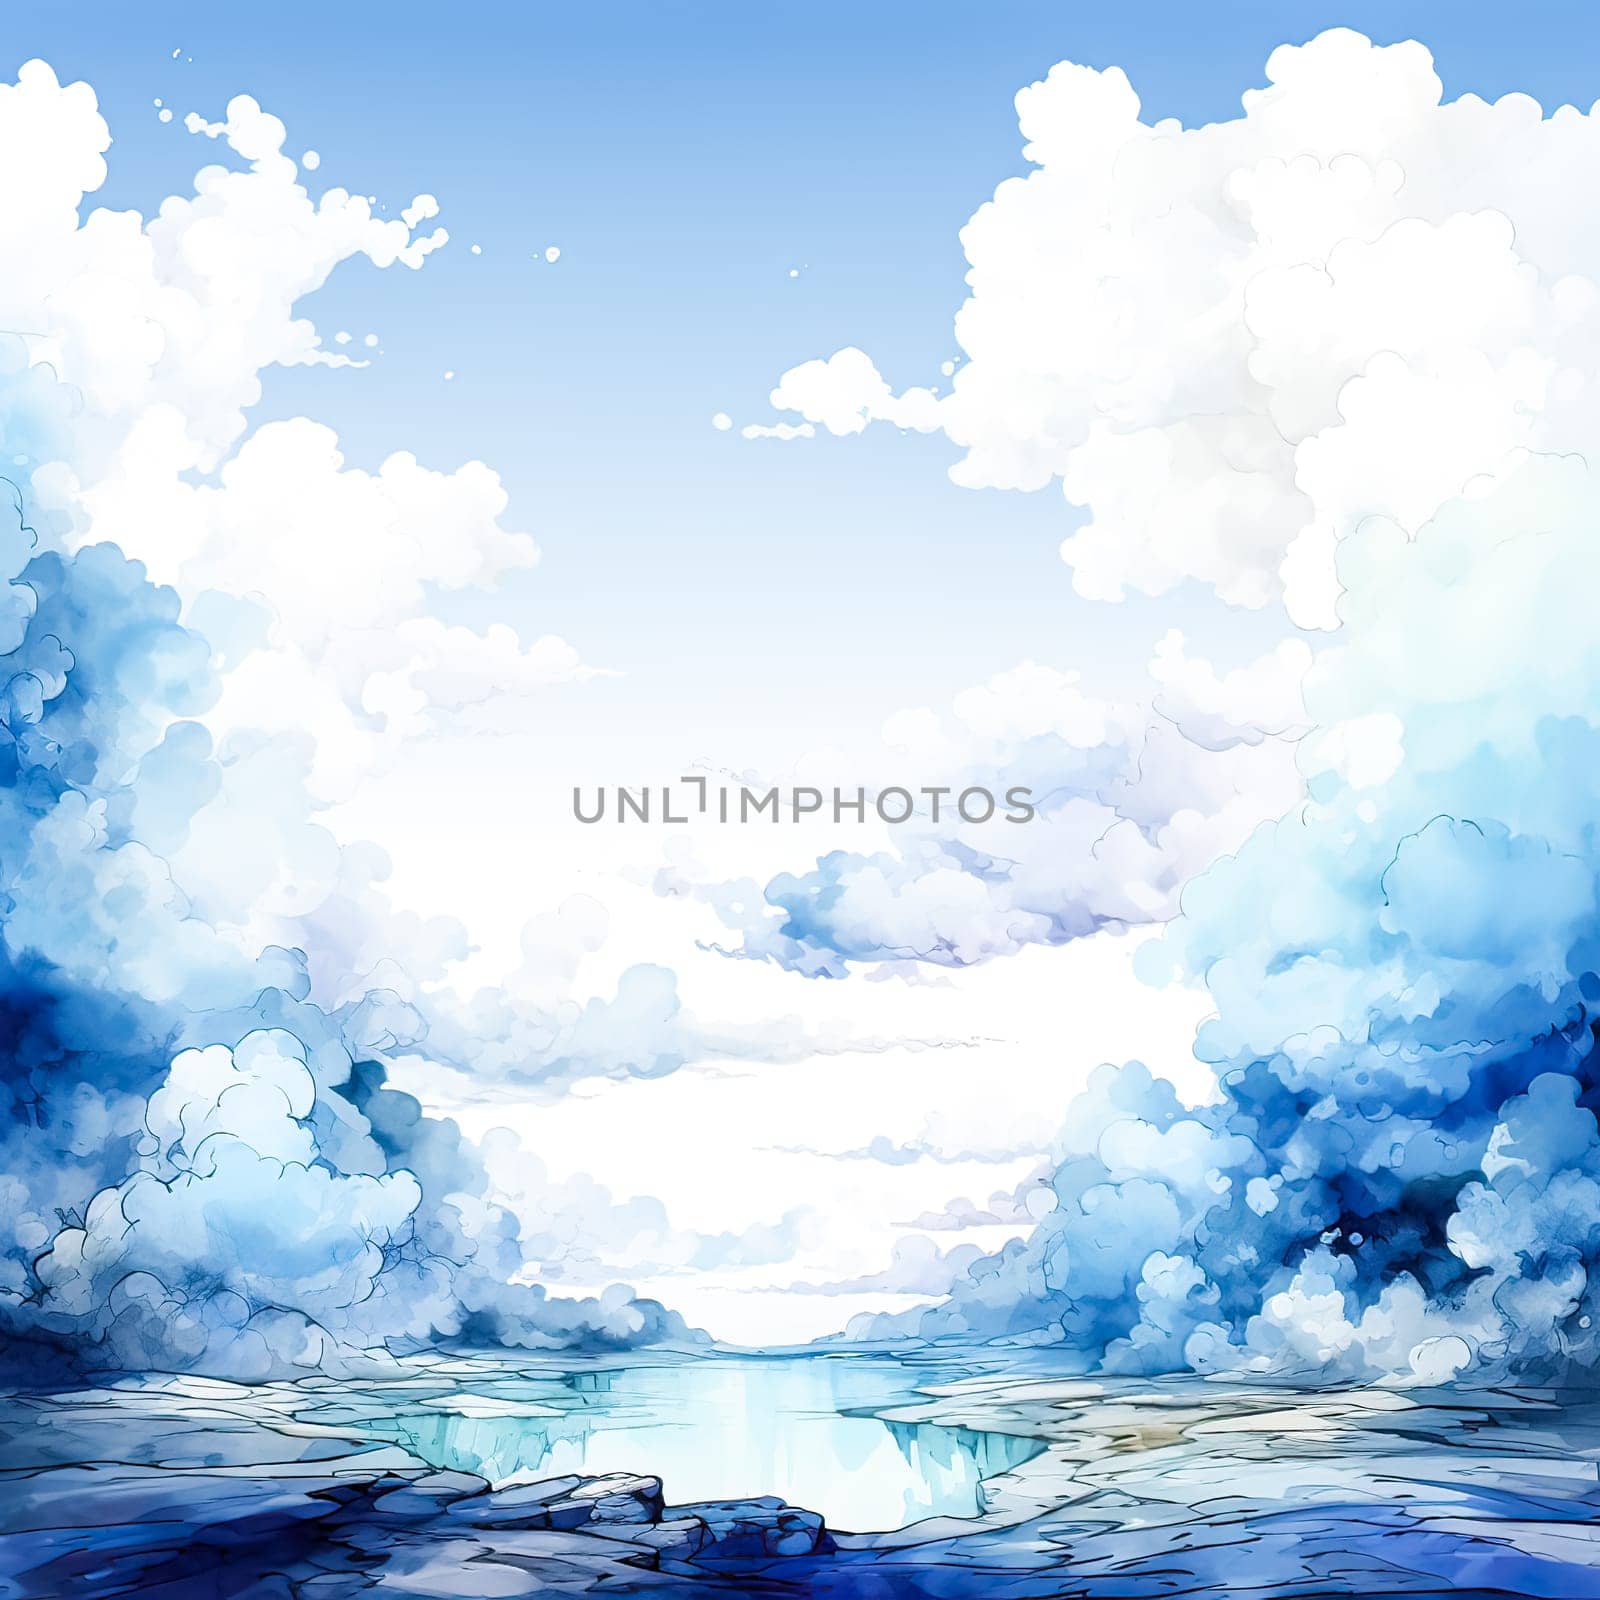 Serene watercolor landscape in soothing blues by Alla_Morozova93